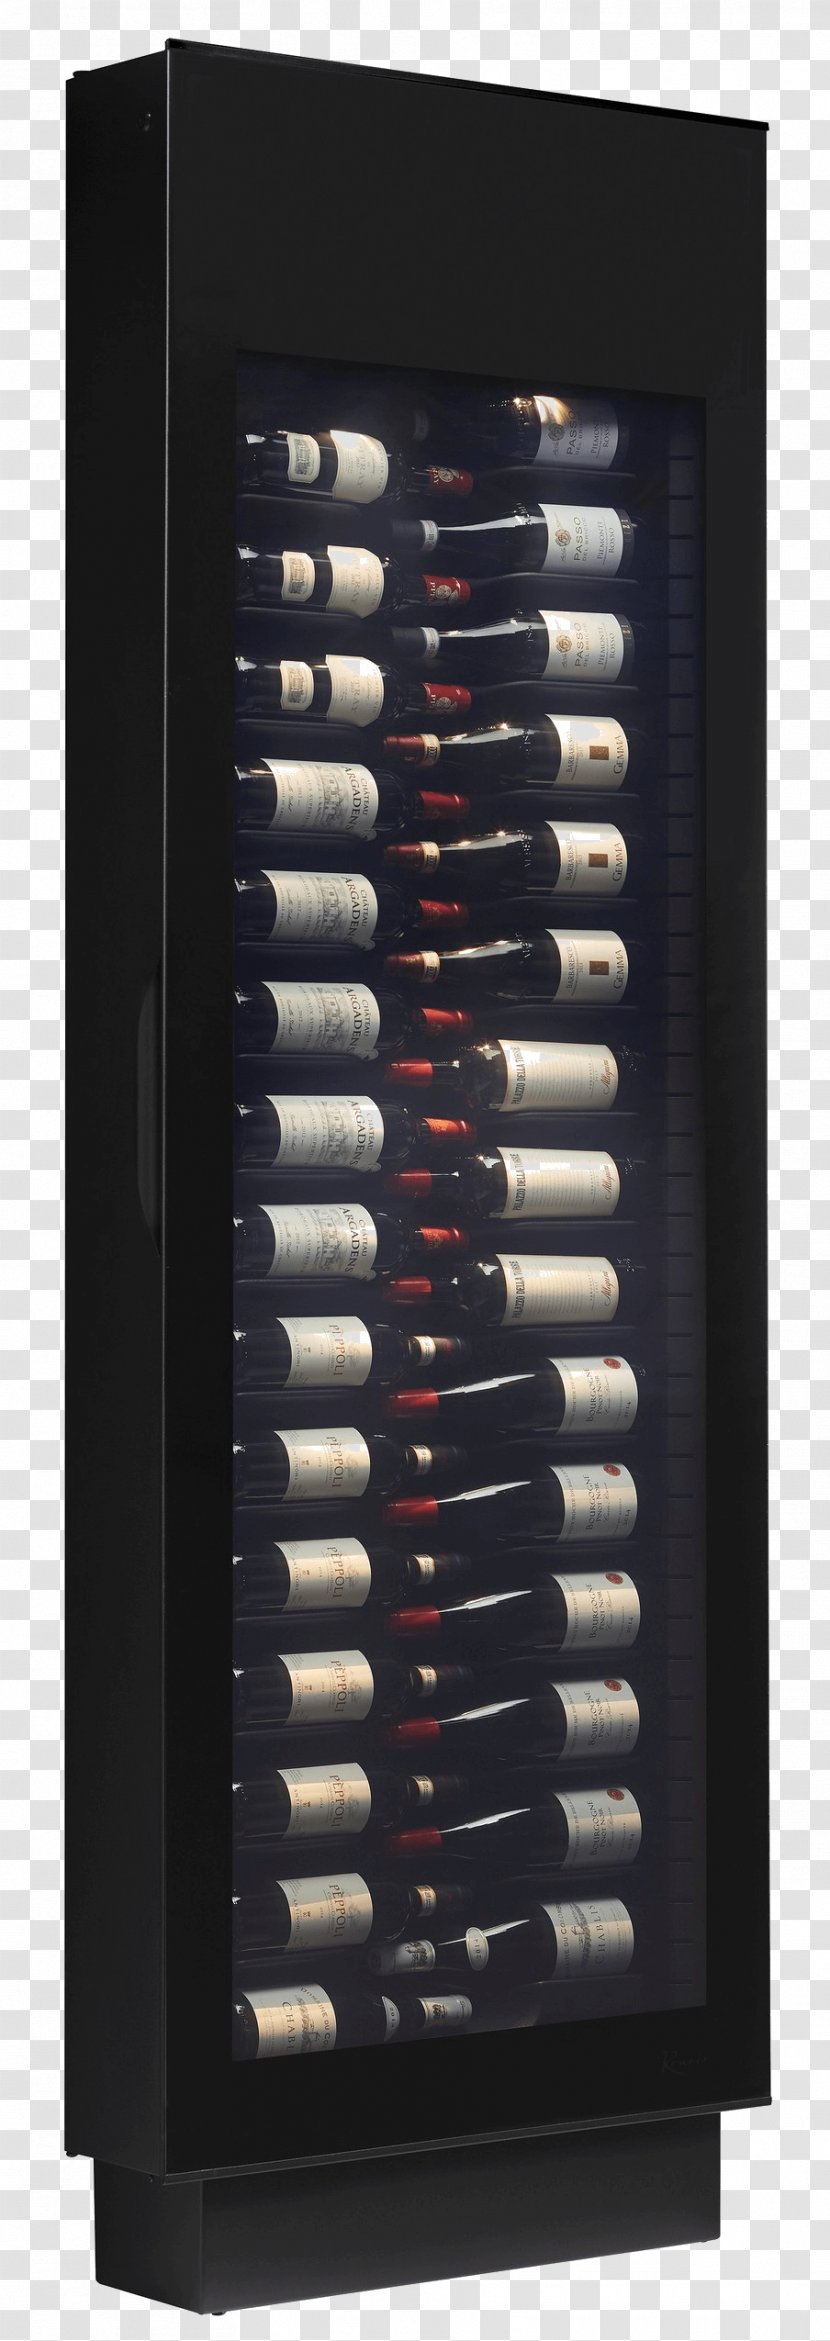 Wine Cooler Storage Of Cellar Danby - Home Appliance Transparent PNG